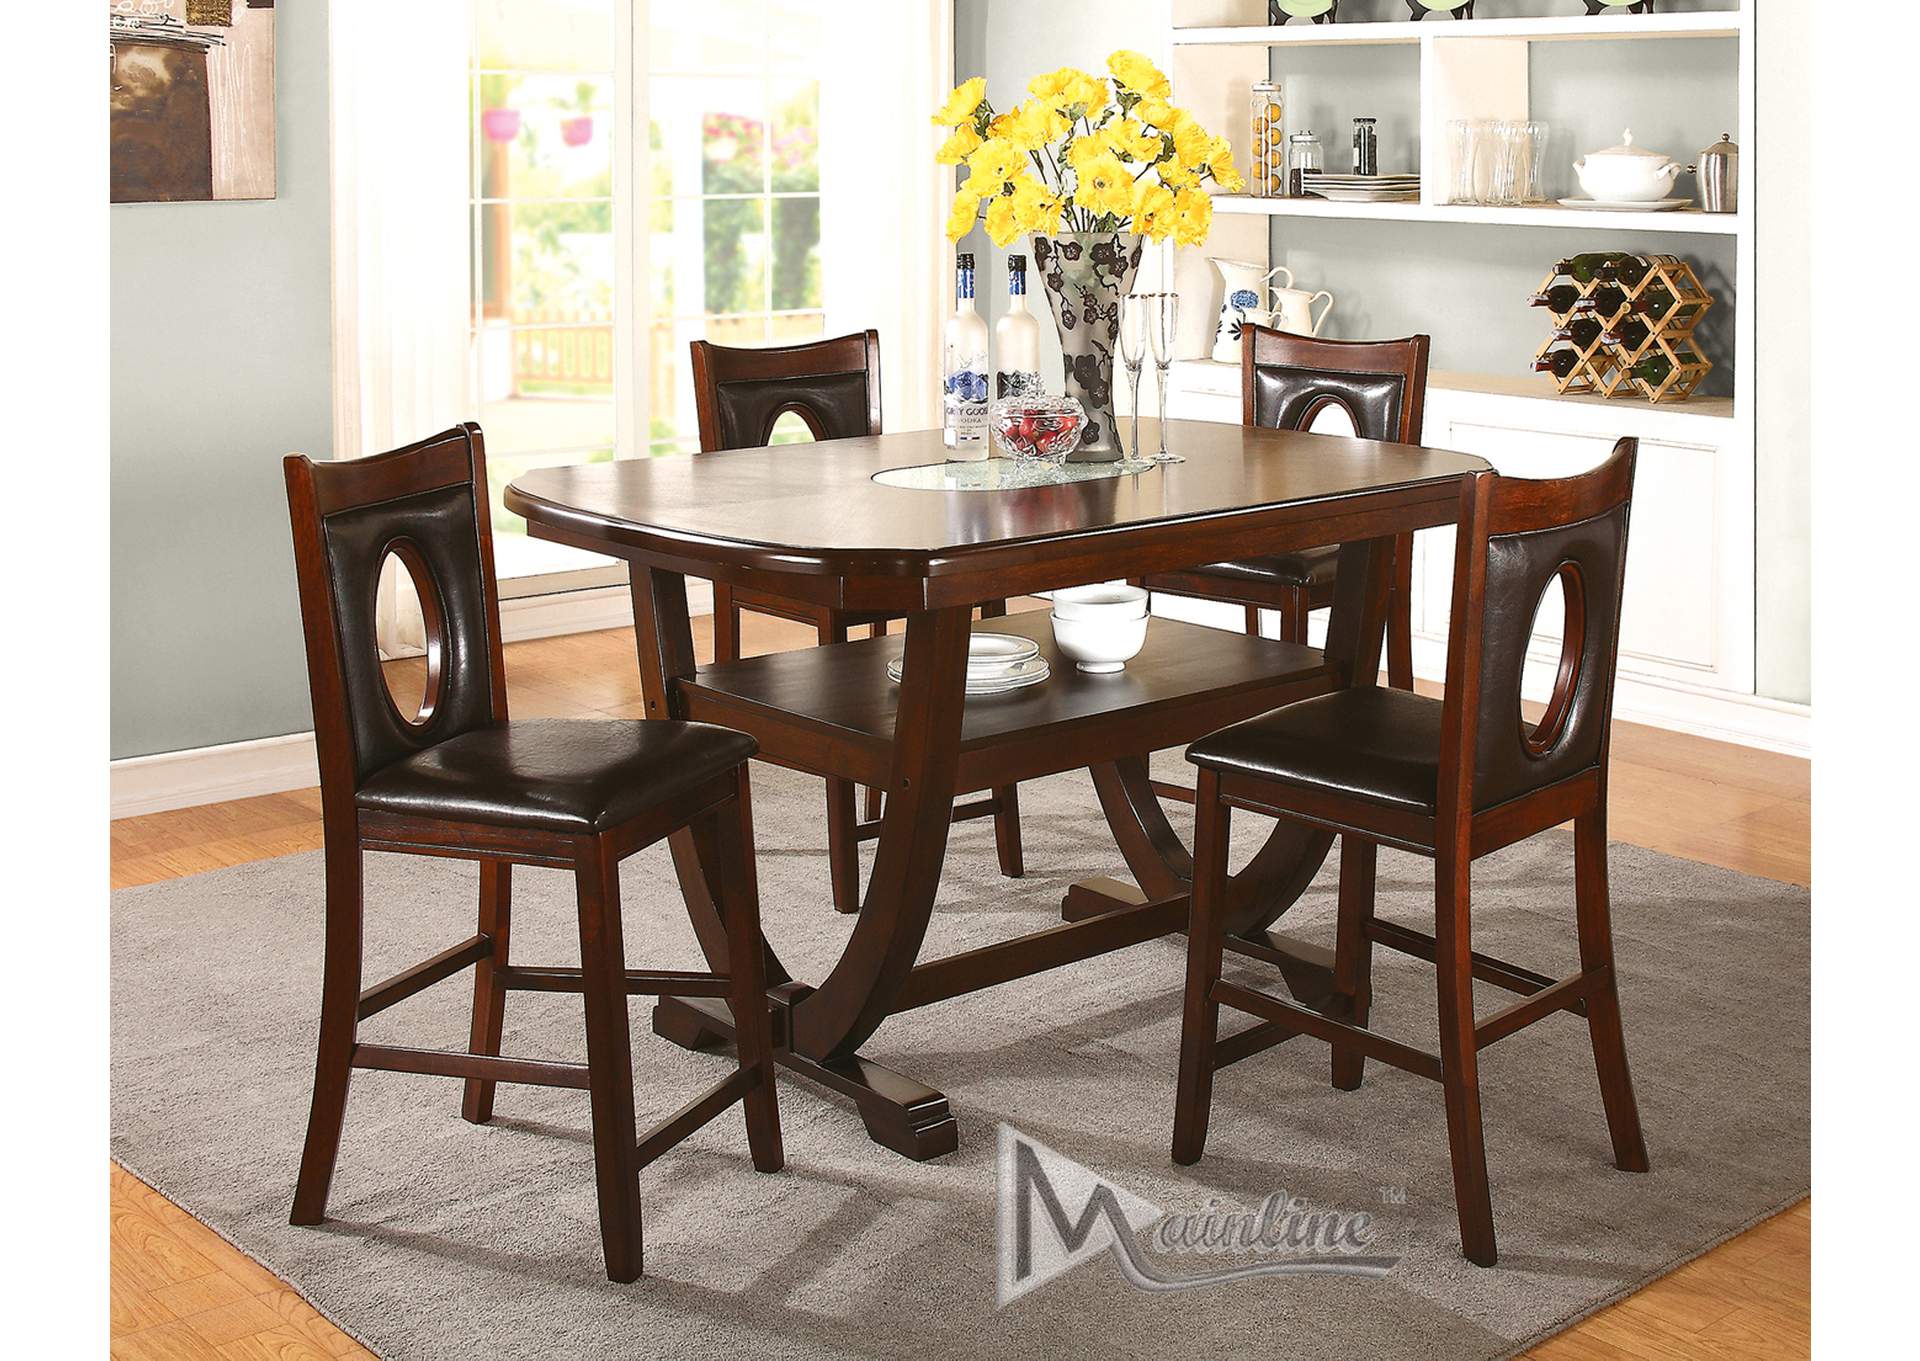 5-Piece Oracle Counter Height Dining Set,Mainline